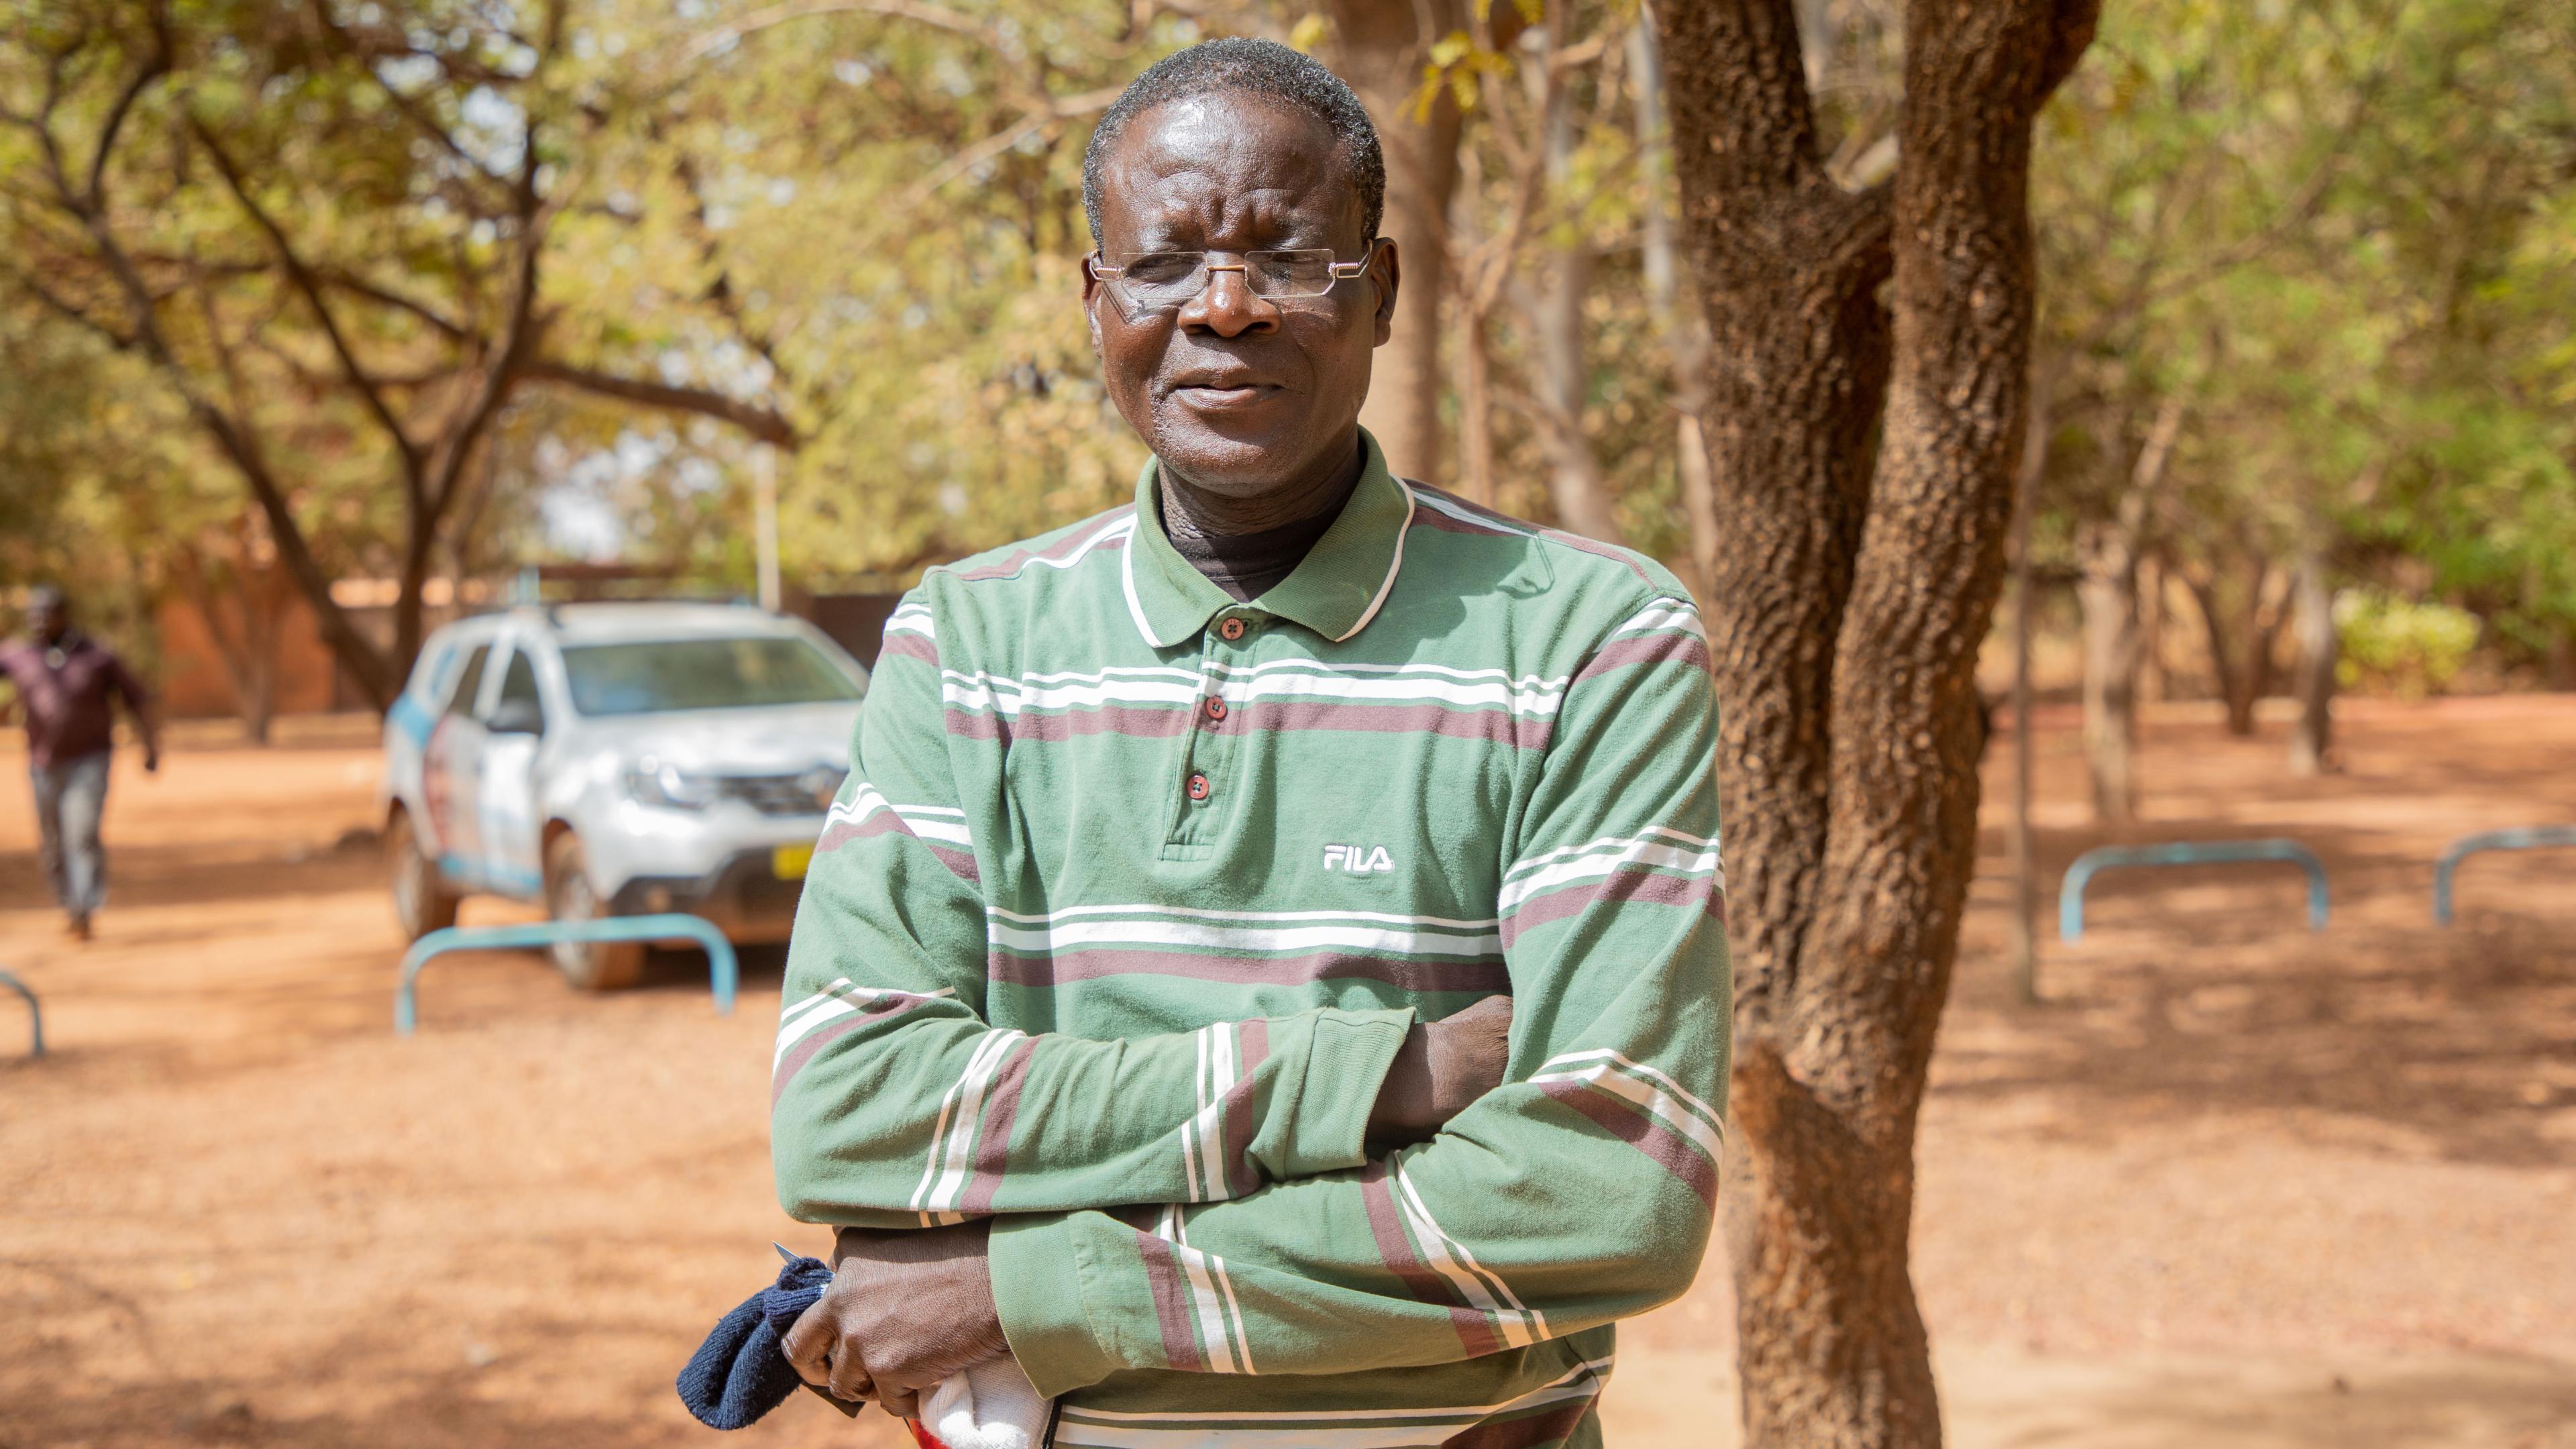 Patient from Burkina Faso with one-dollar glasses, standing in front of a tree